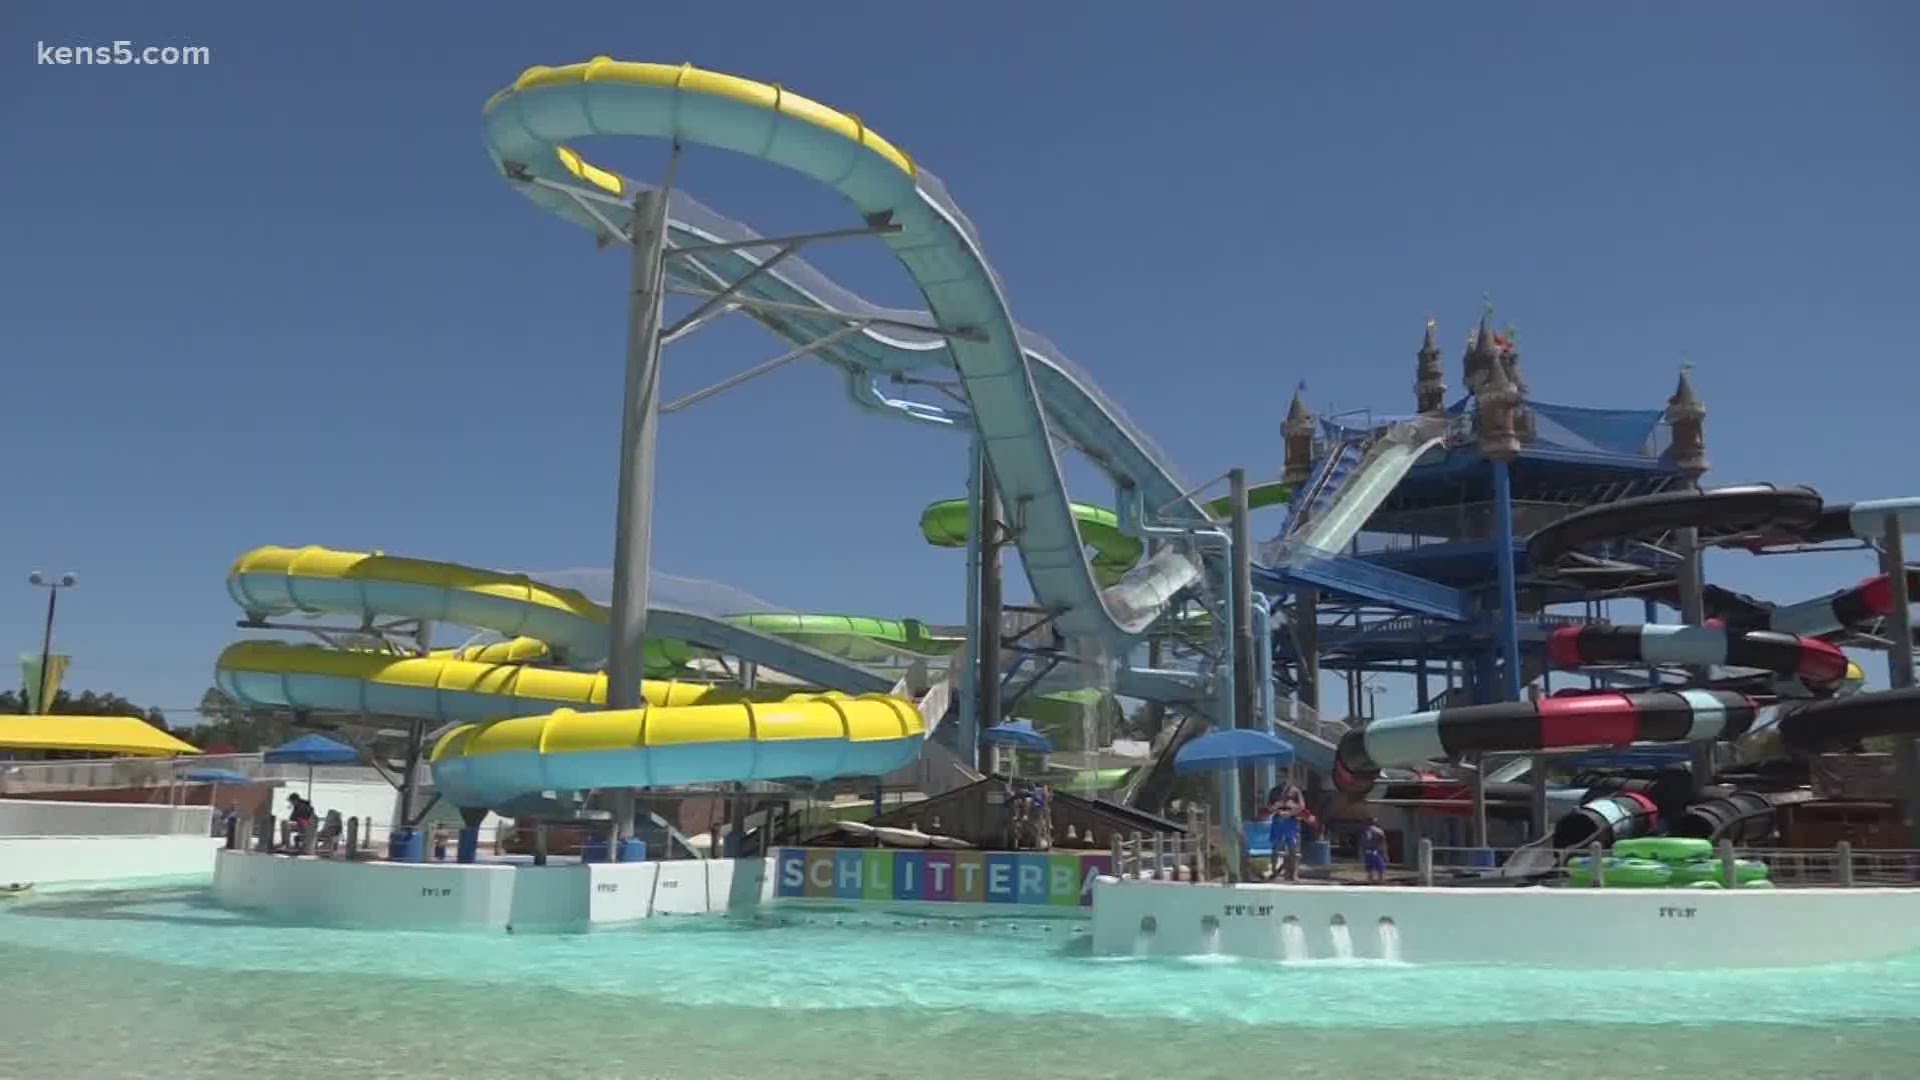 Schlitterbahn reopening expected to heat up New Braunfels economy